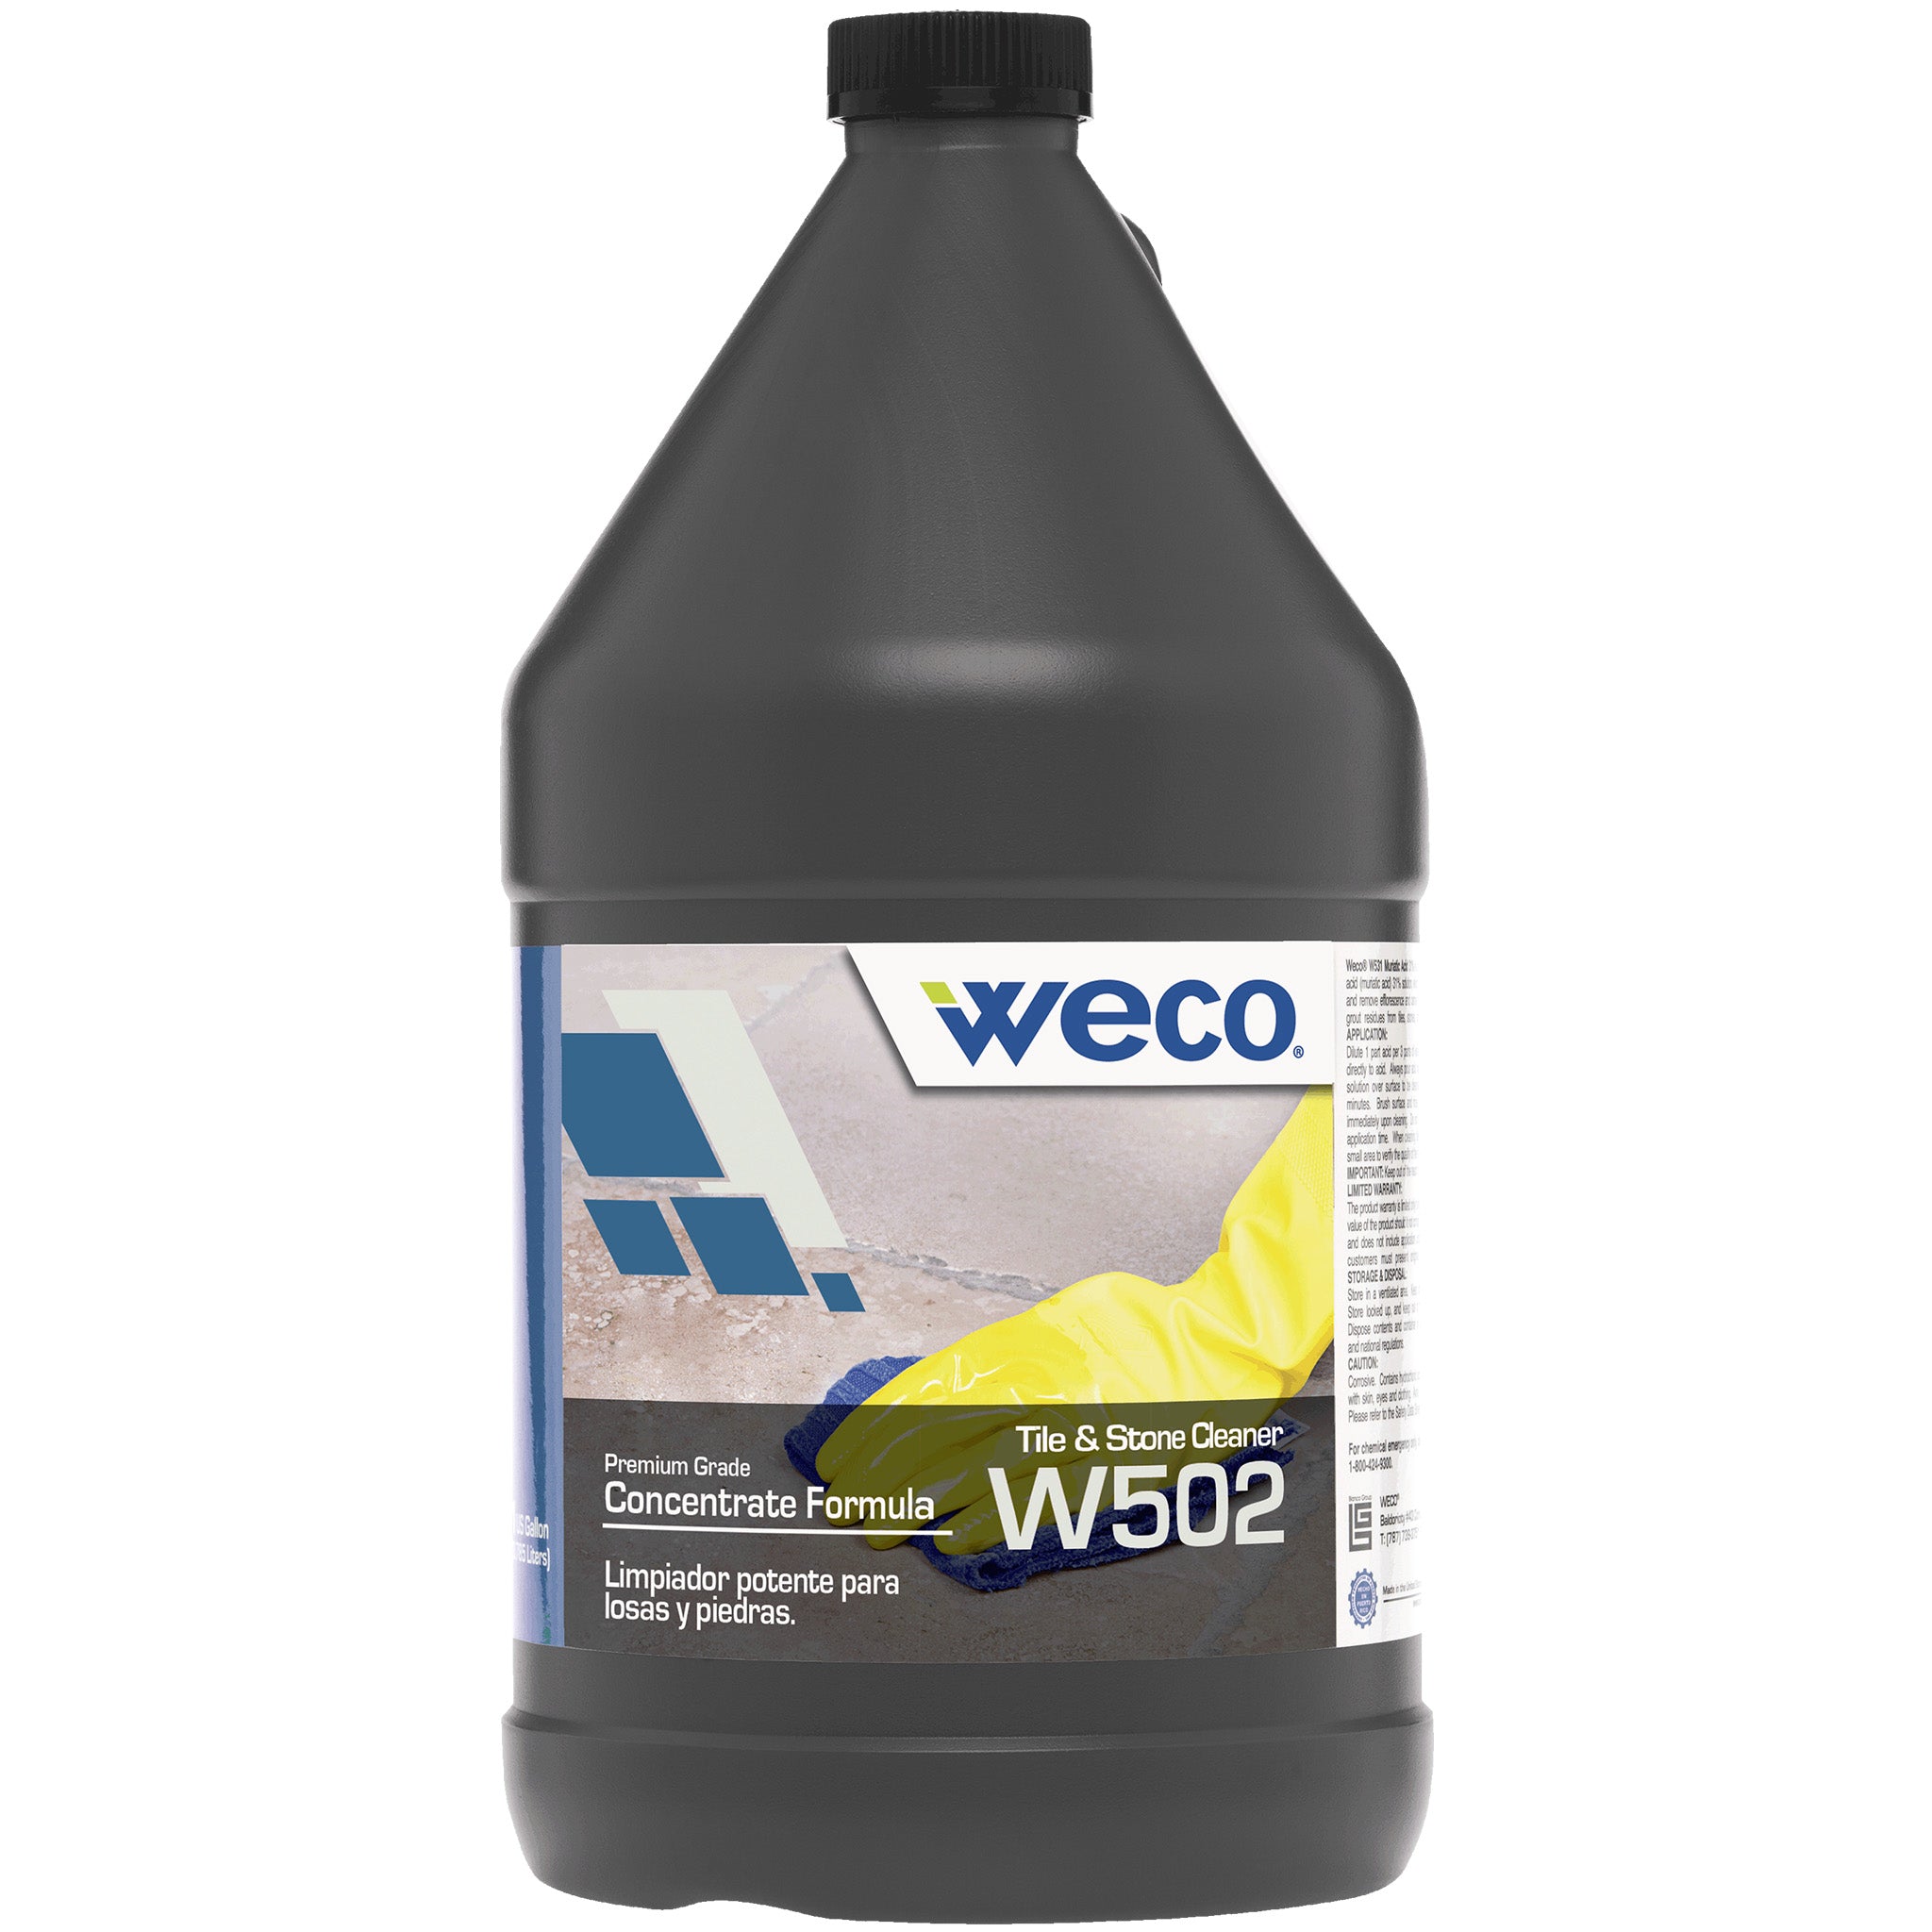 W-502 Tile & Stone Cleaner